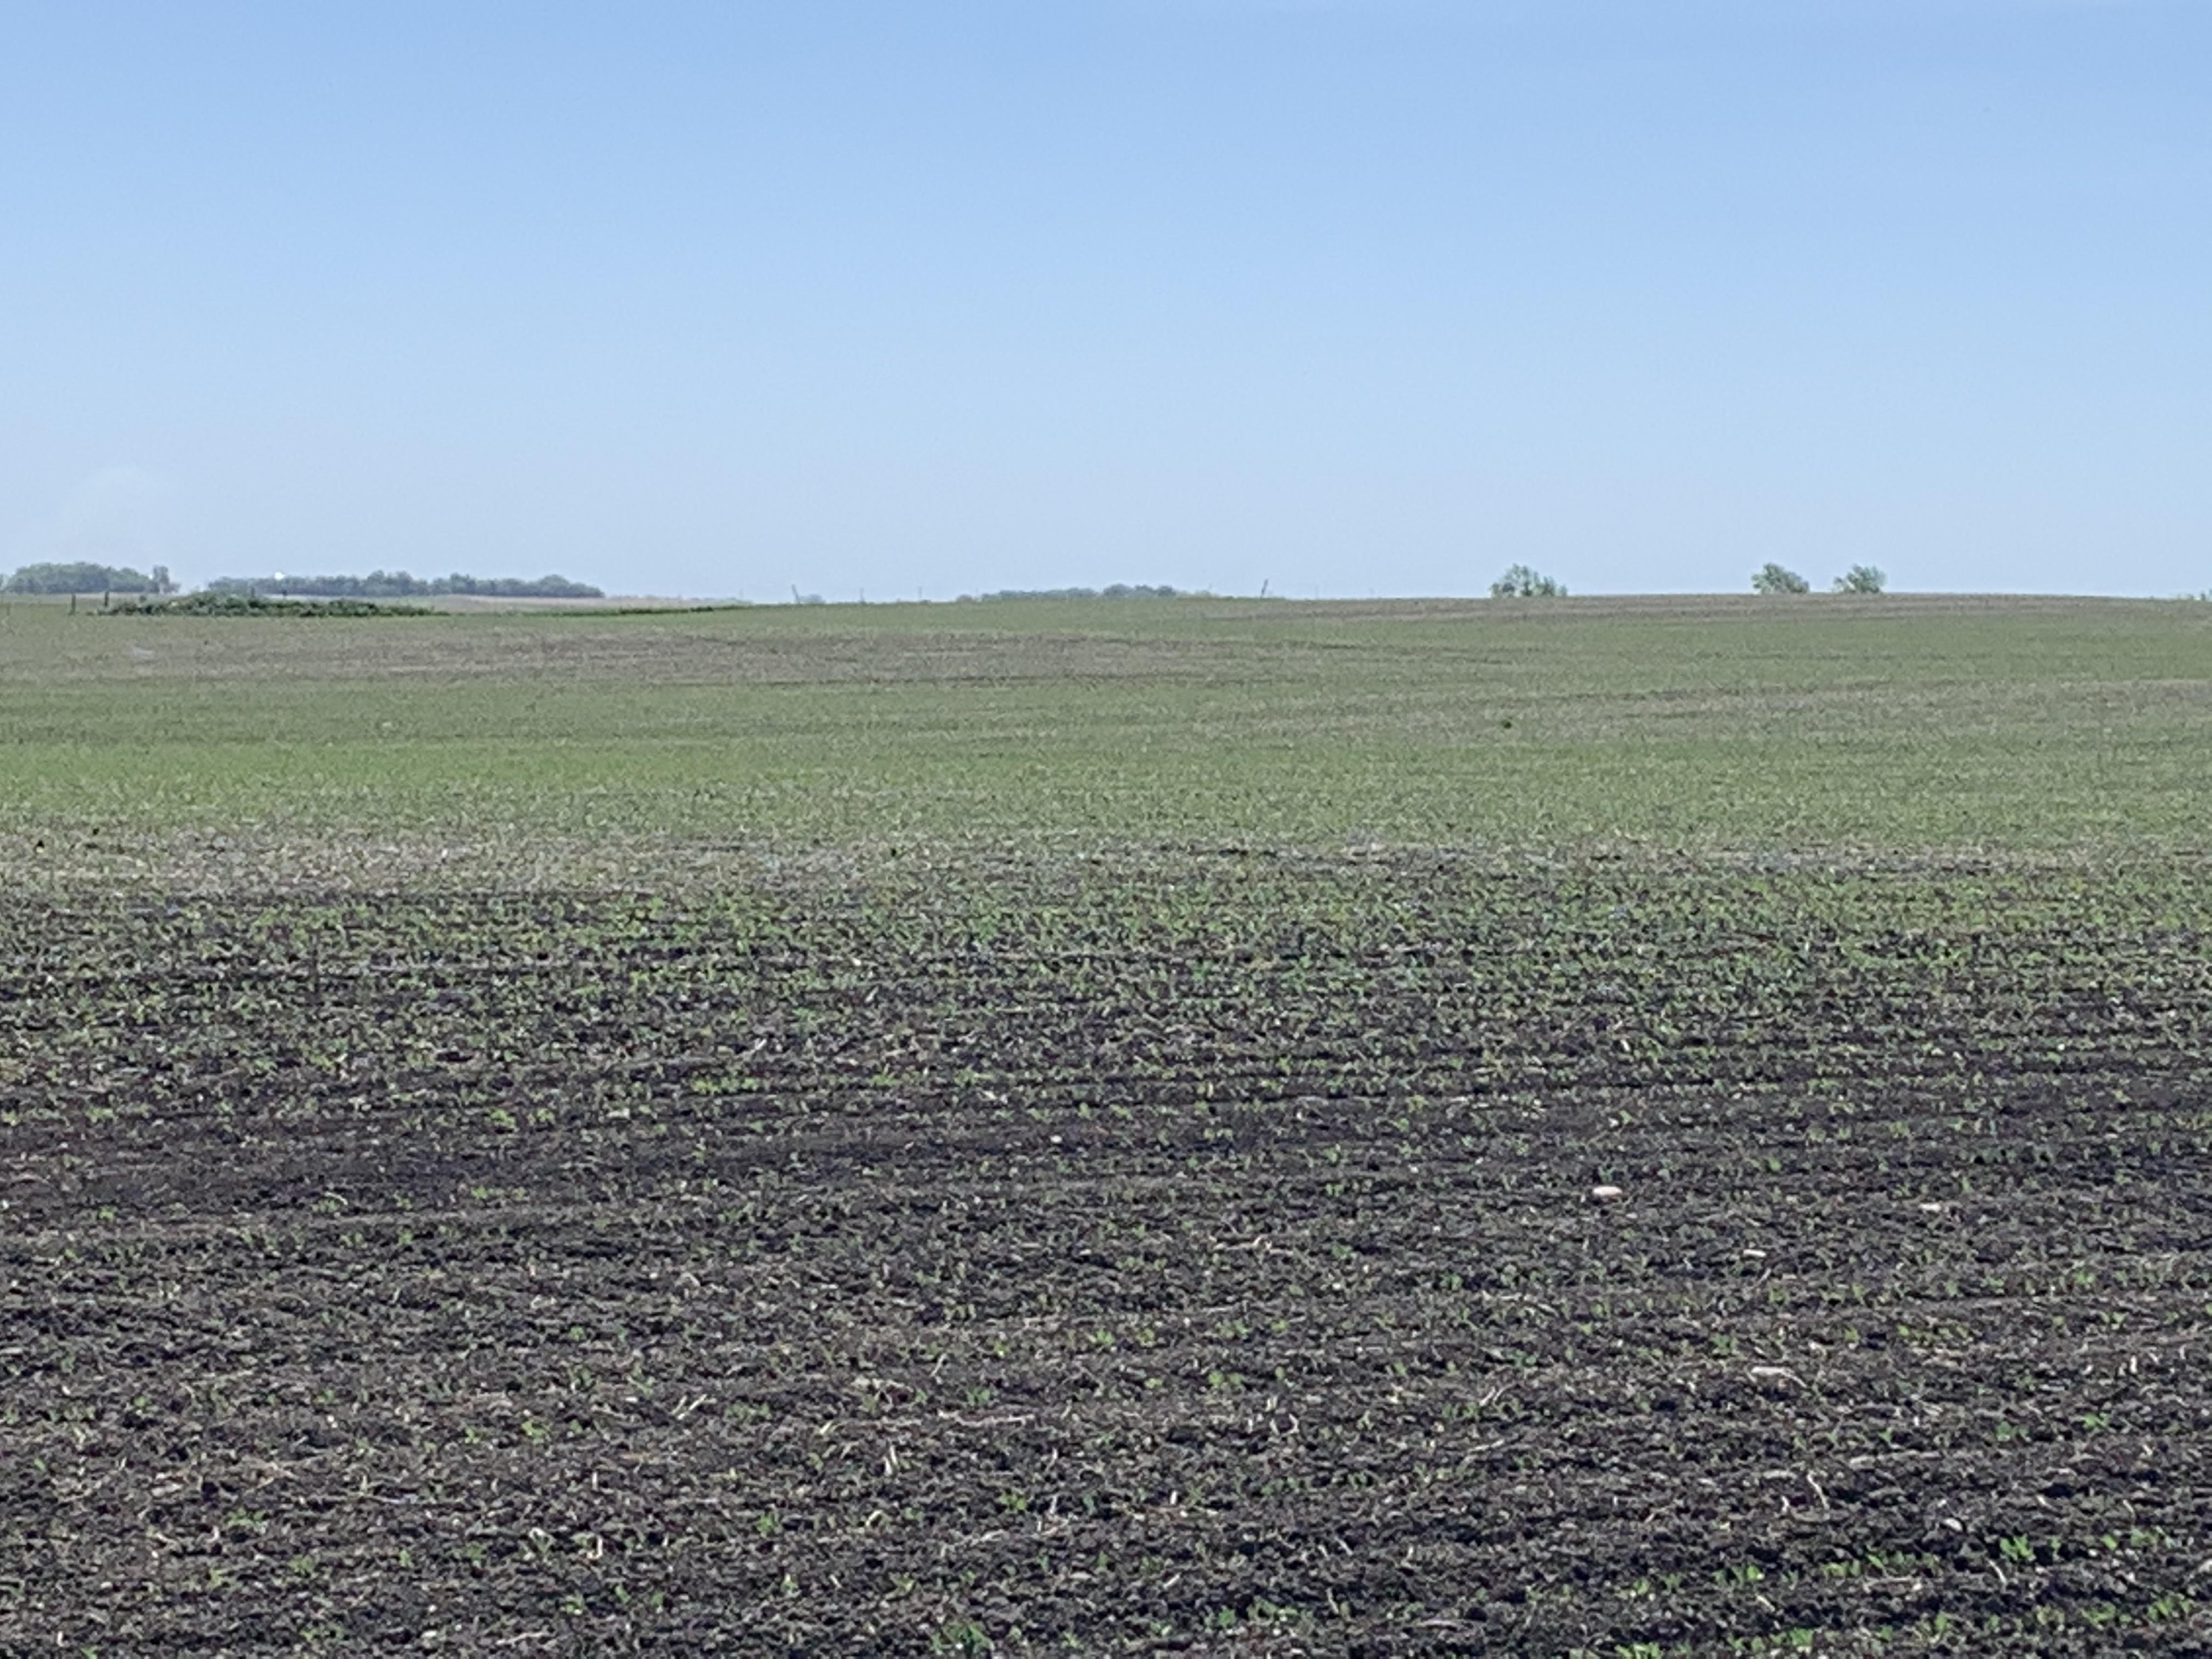 Afternoon Ag News, February 25, 2022: A look at the spring weather forecast